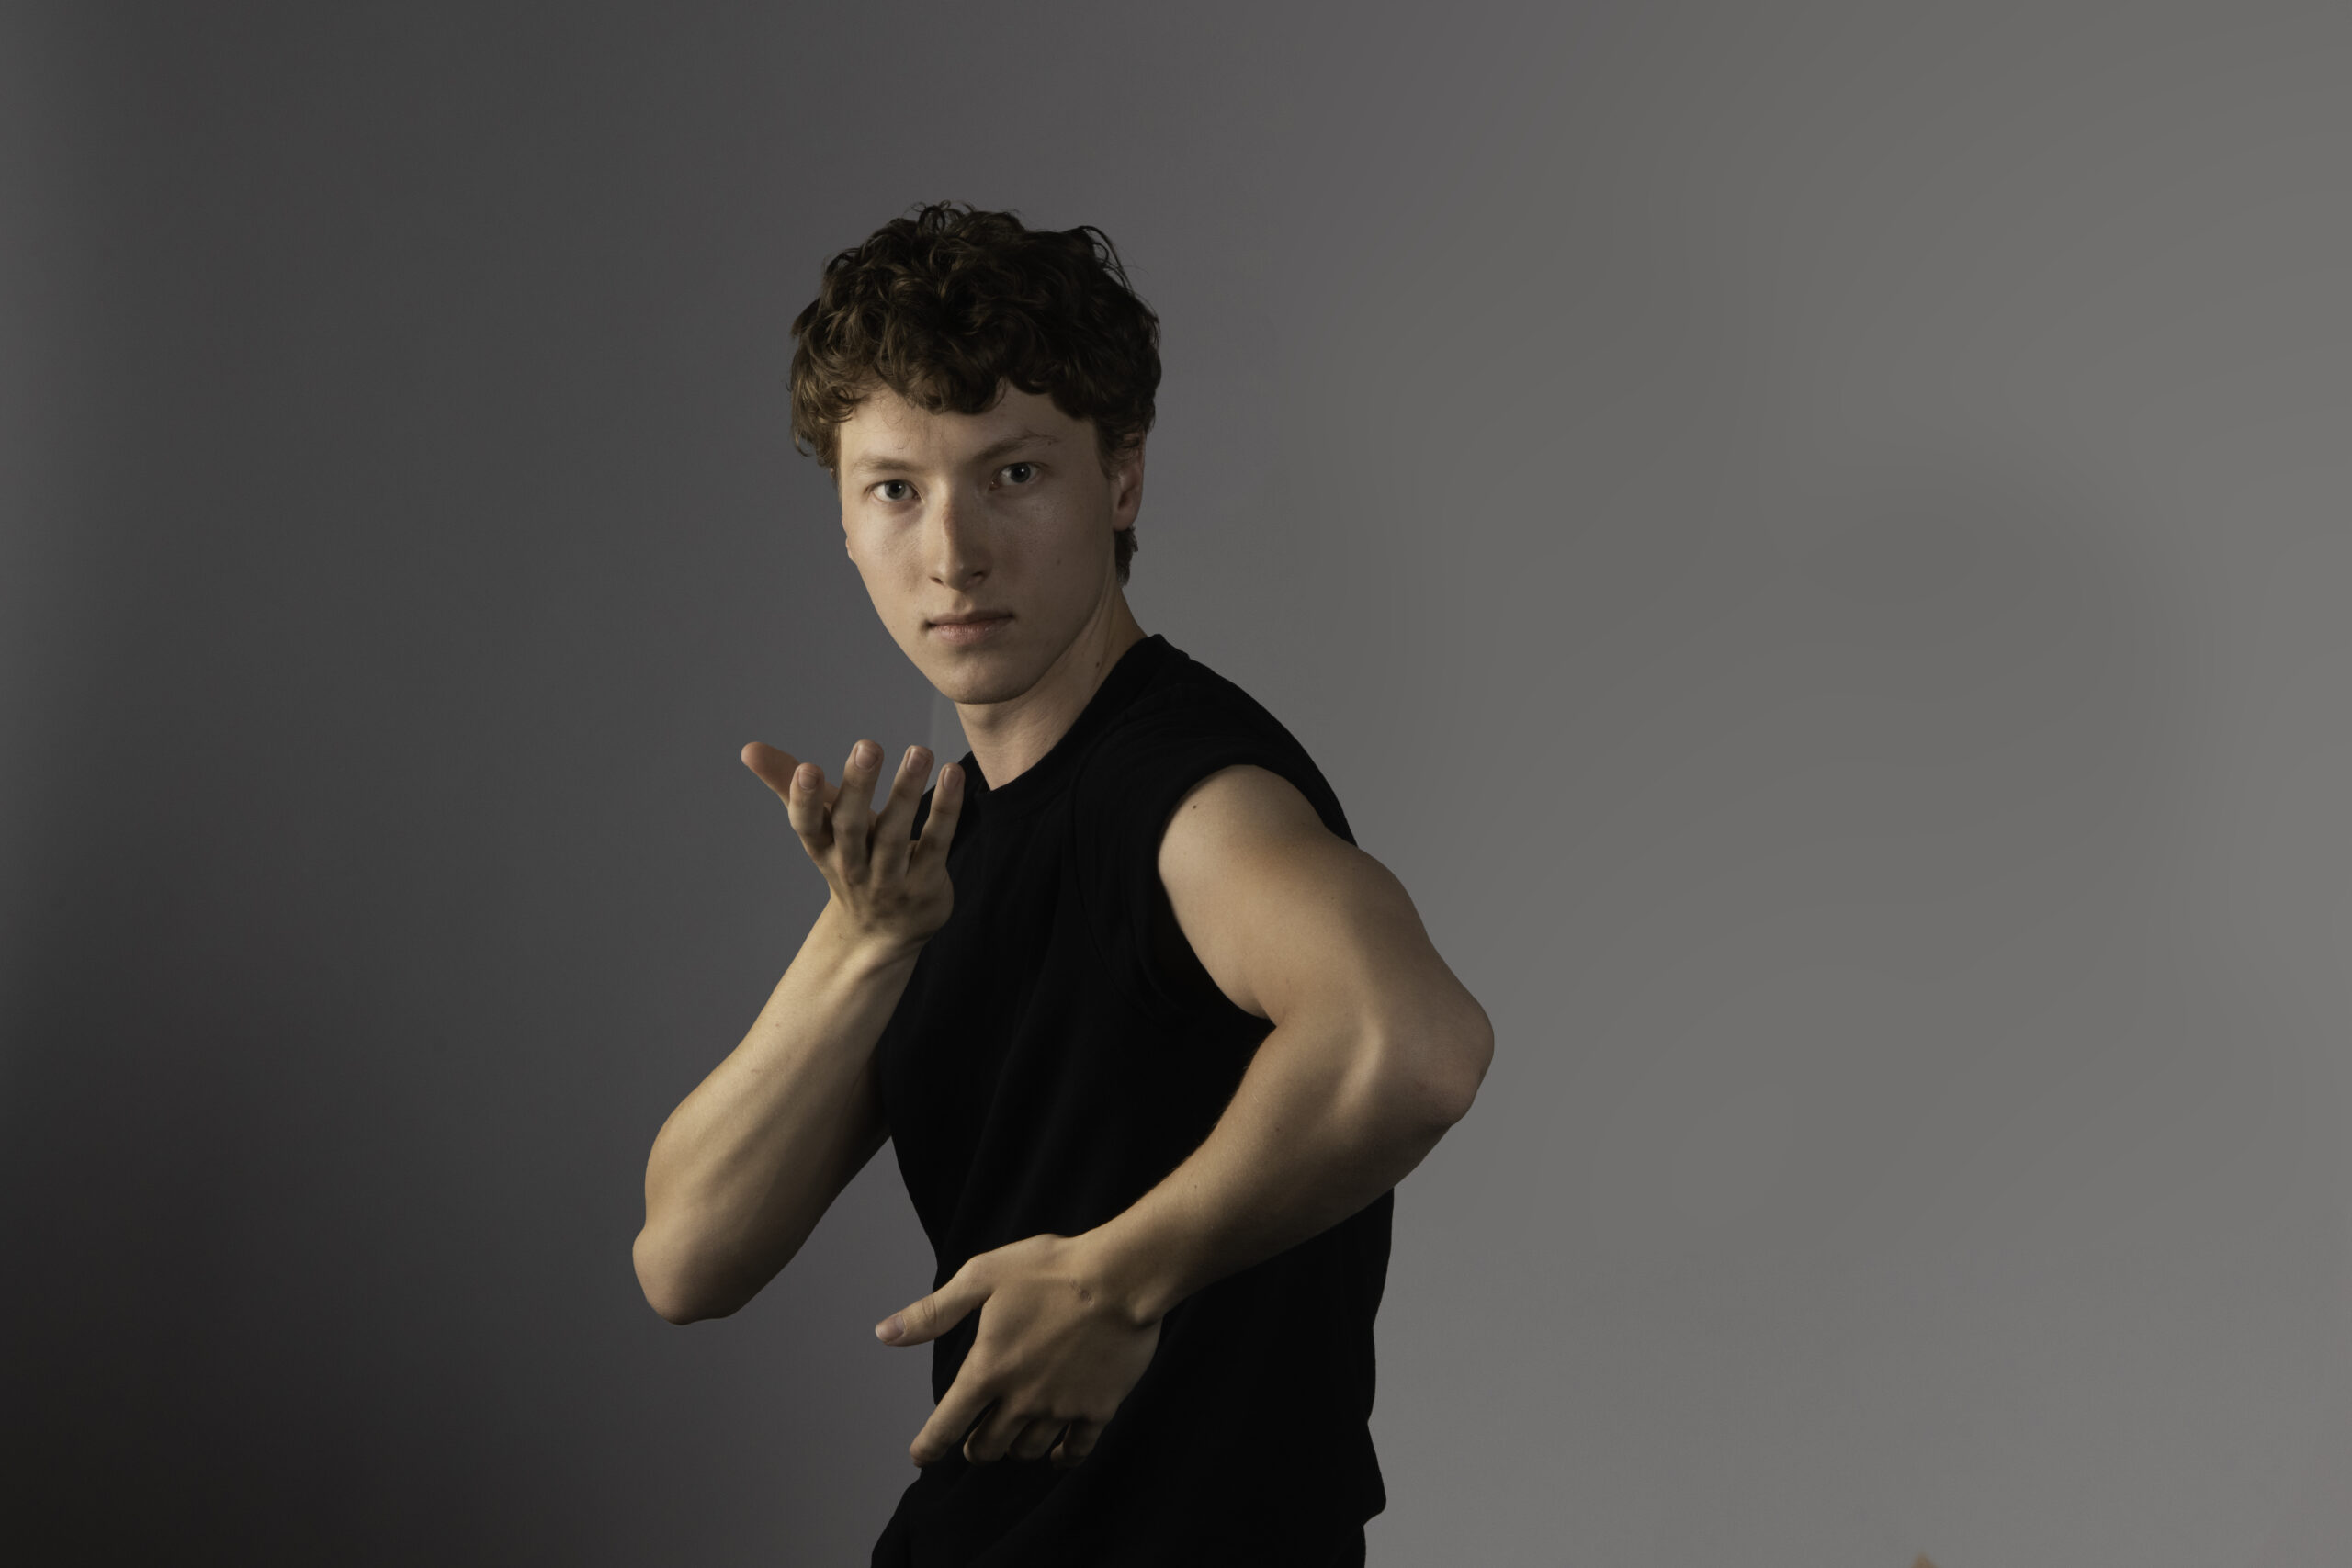 Male Dancer with short curly brown hair in short sleeved black t-shirt